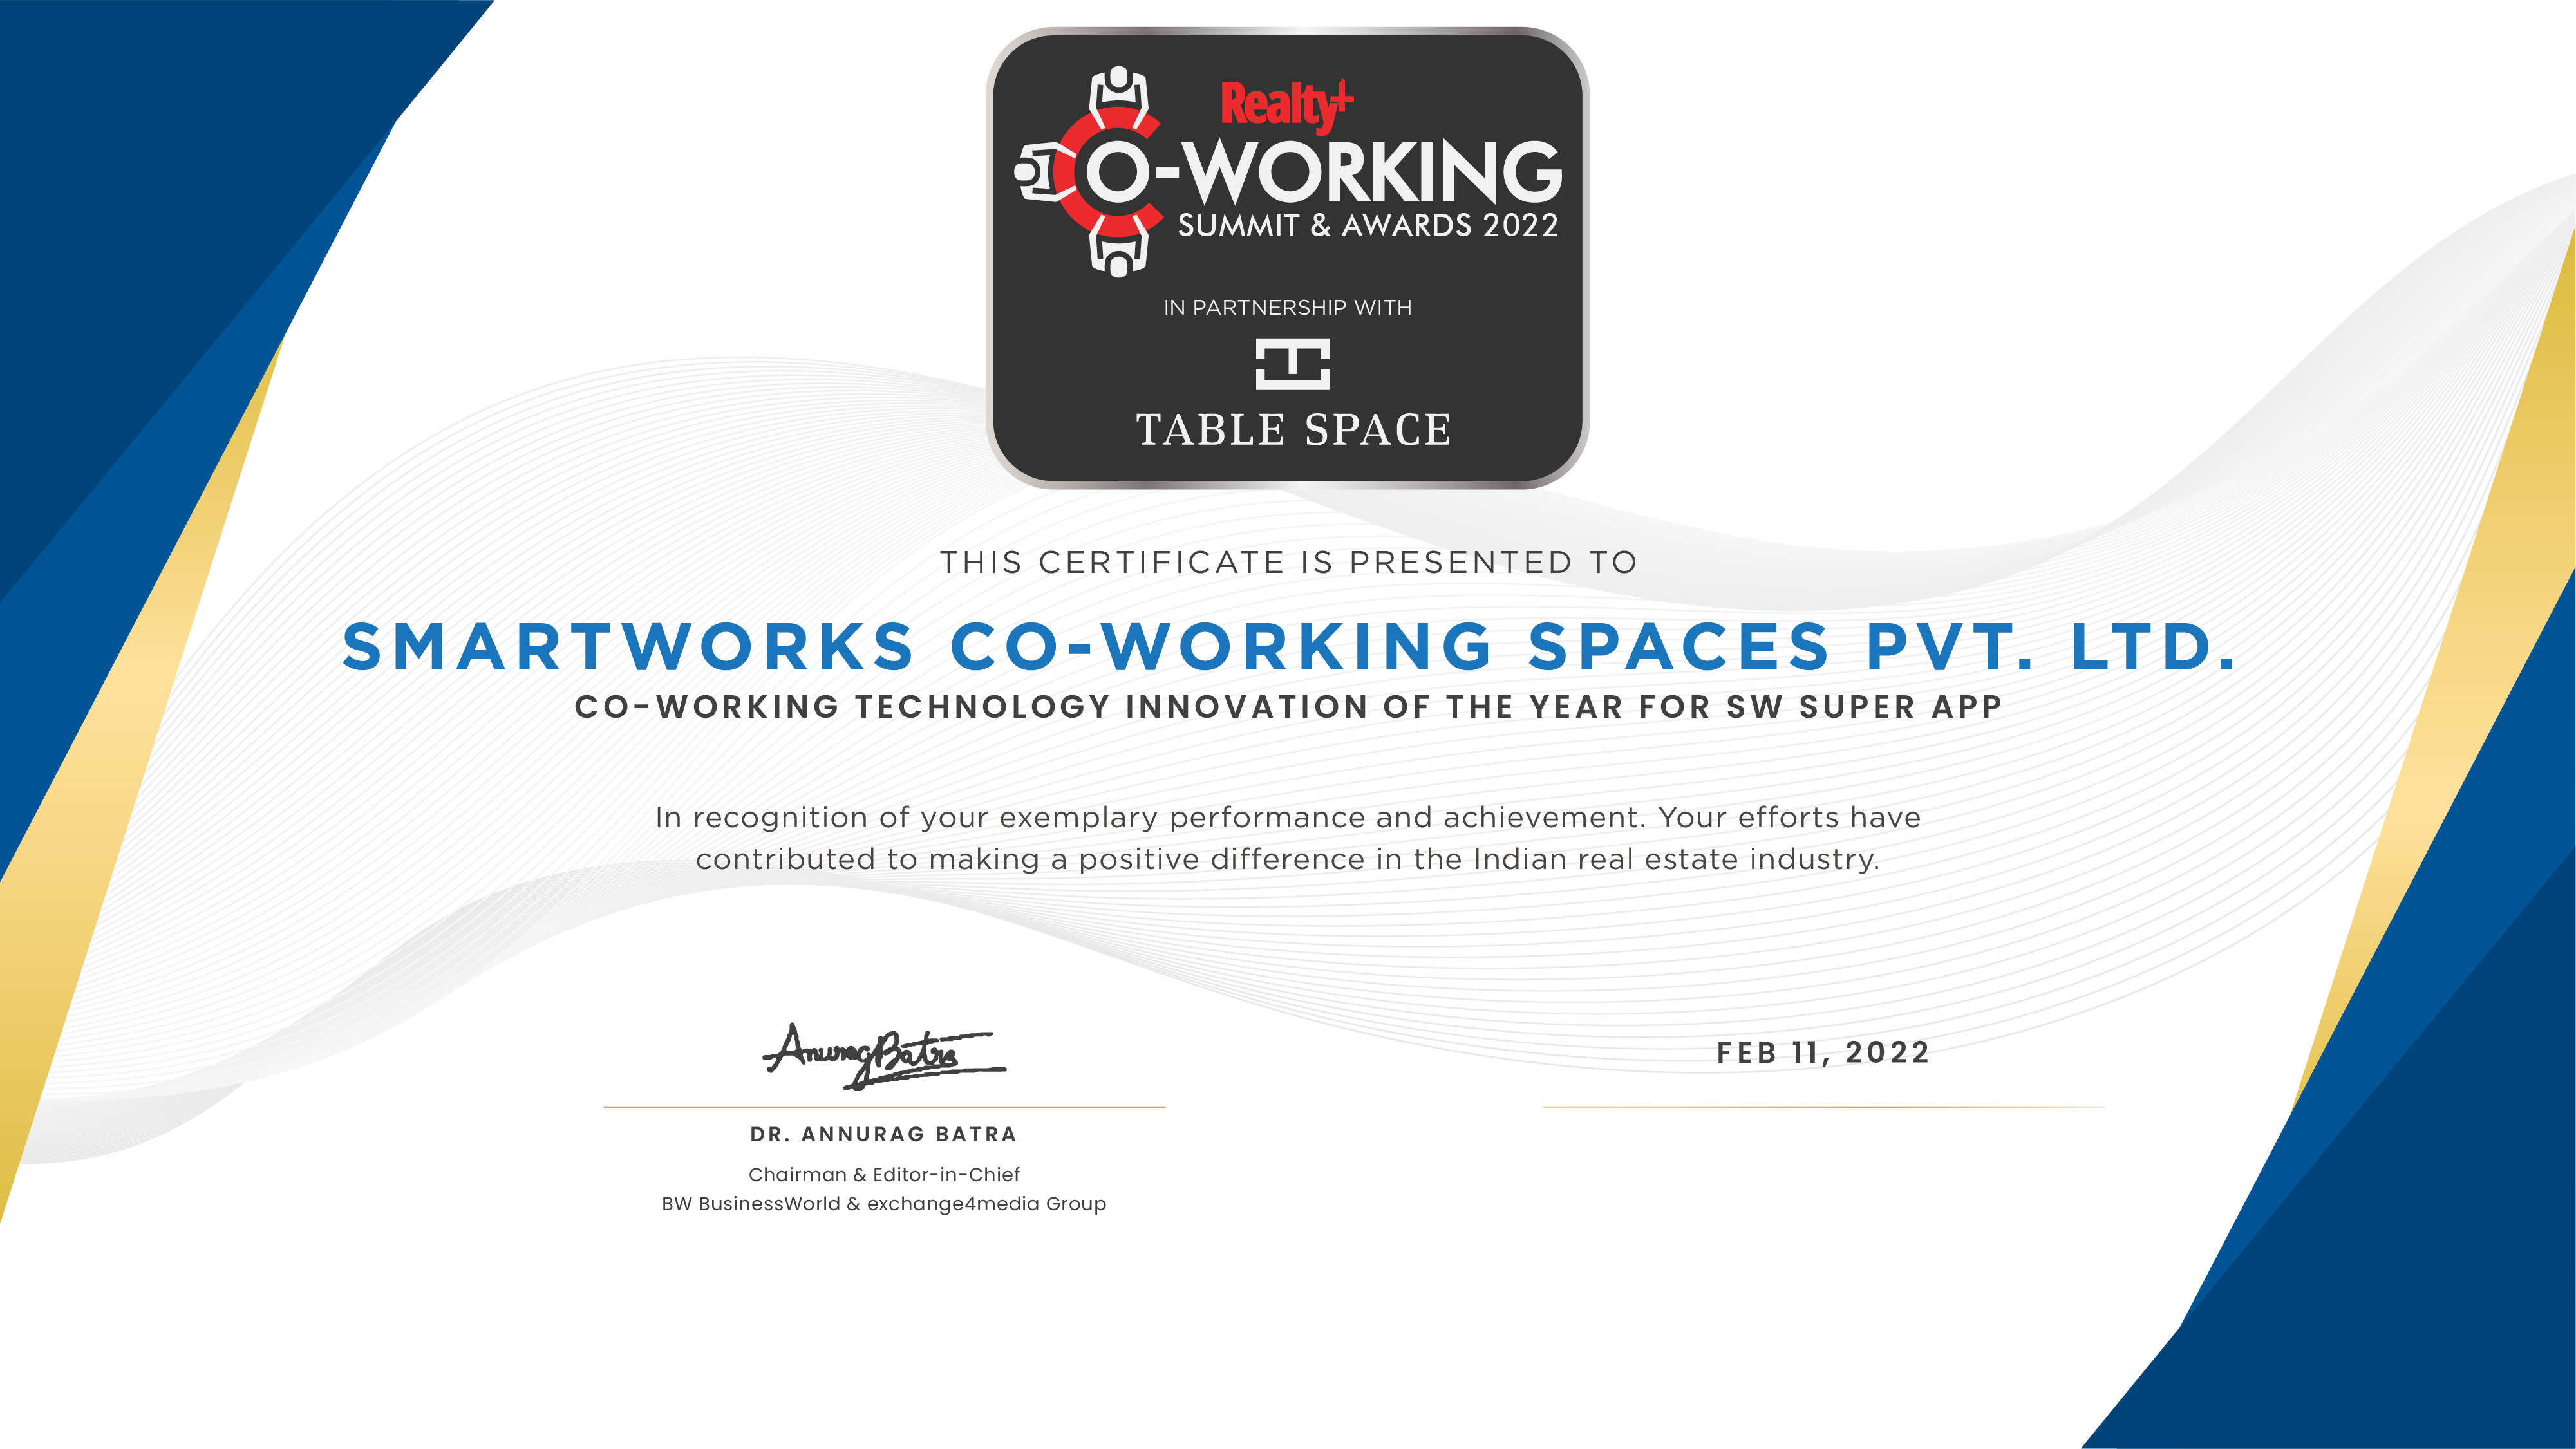 Smartworks bags Co-working Brand of the Year (National) at 3rd Realty+ Co-Working Summit & Awards, 2022